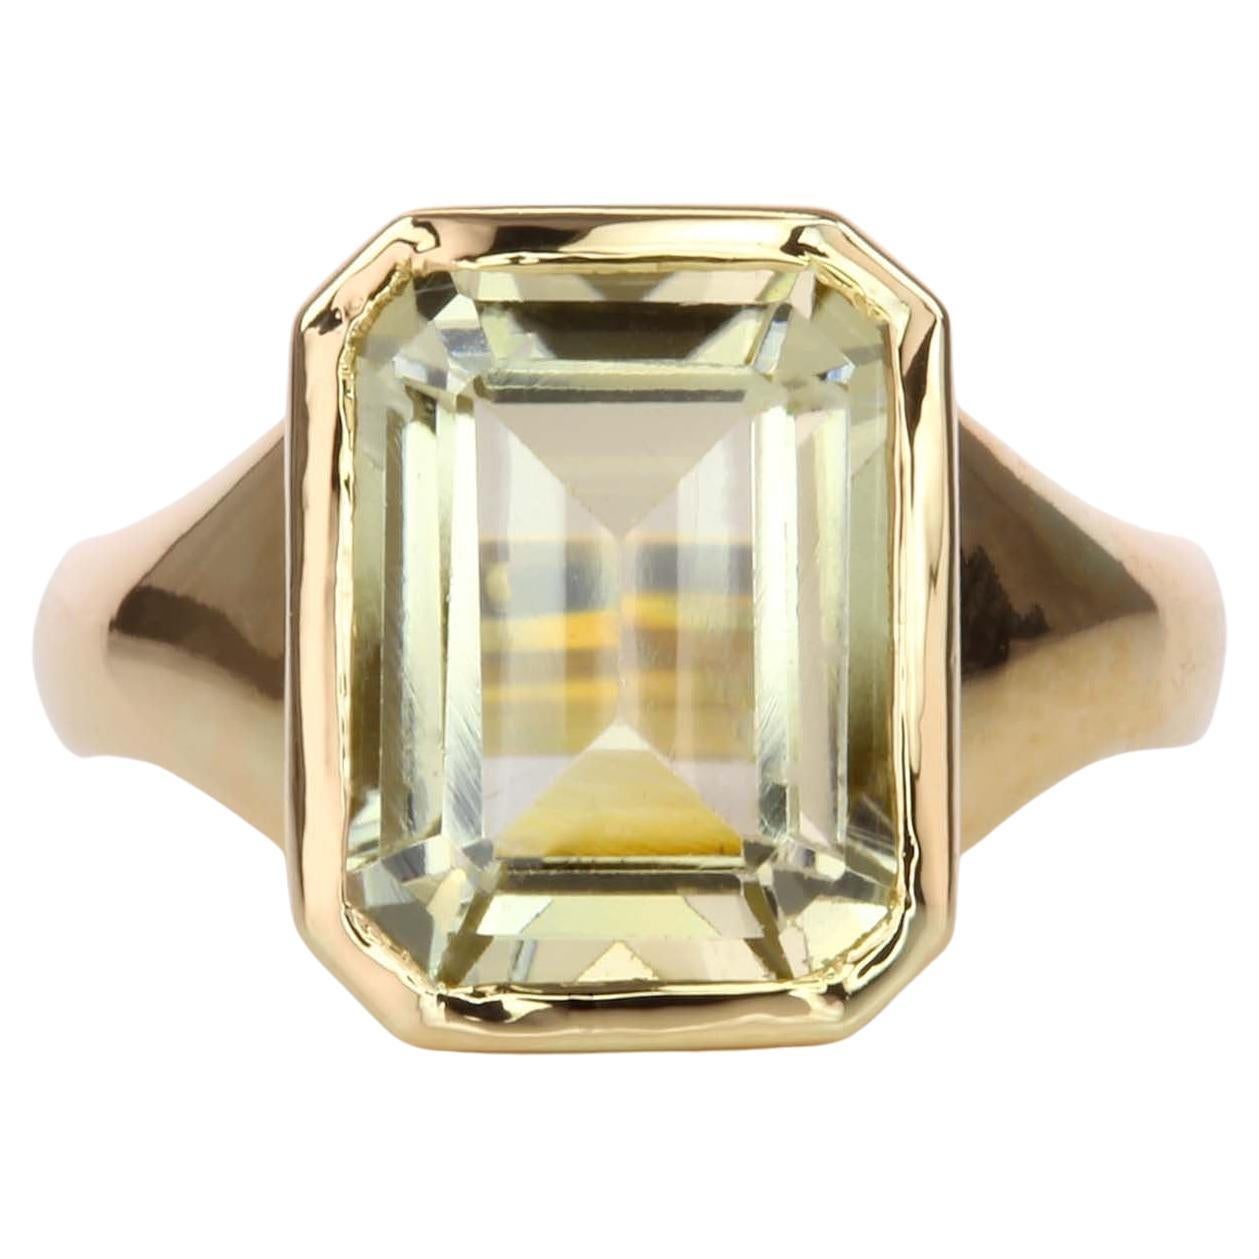 4.75ct Yellow Tourmaline Pinky Ring-Emerald Cut-18KT Gold-GIA Certified-Rare For Sale